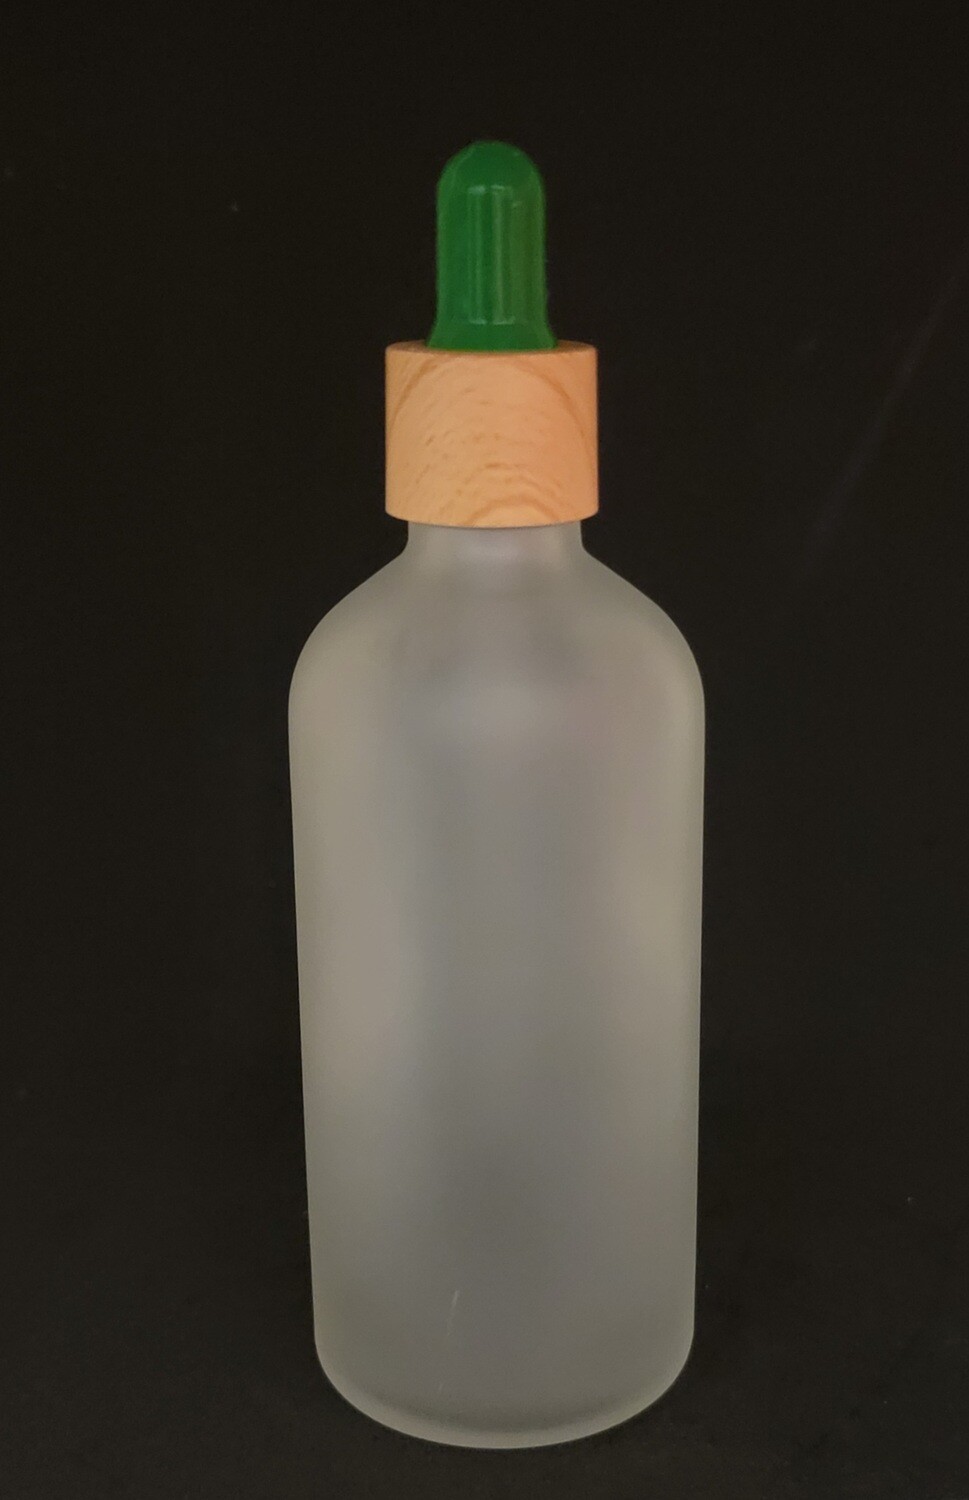 100mL FROSTED CLEAR Glass Dropper Bottle with GREEN Teat & 18mm TIMBER Cap